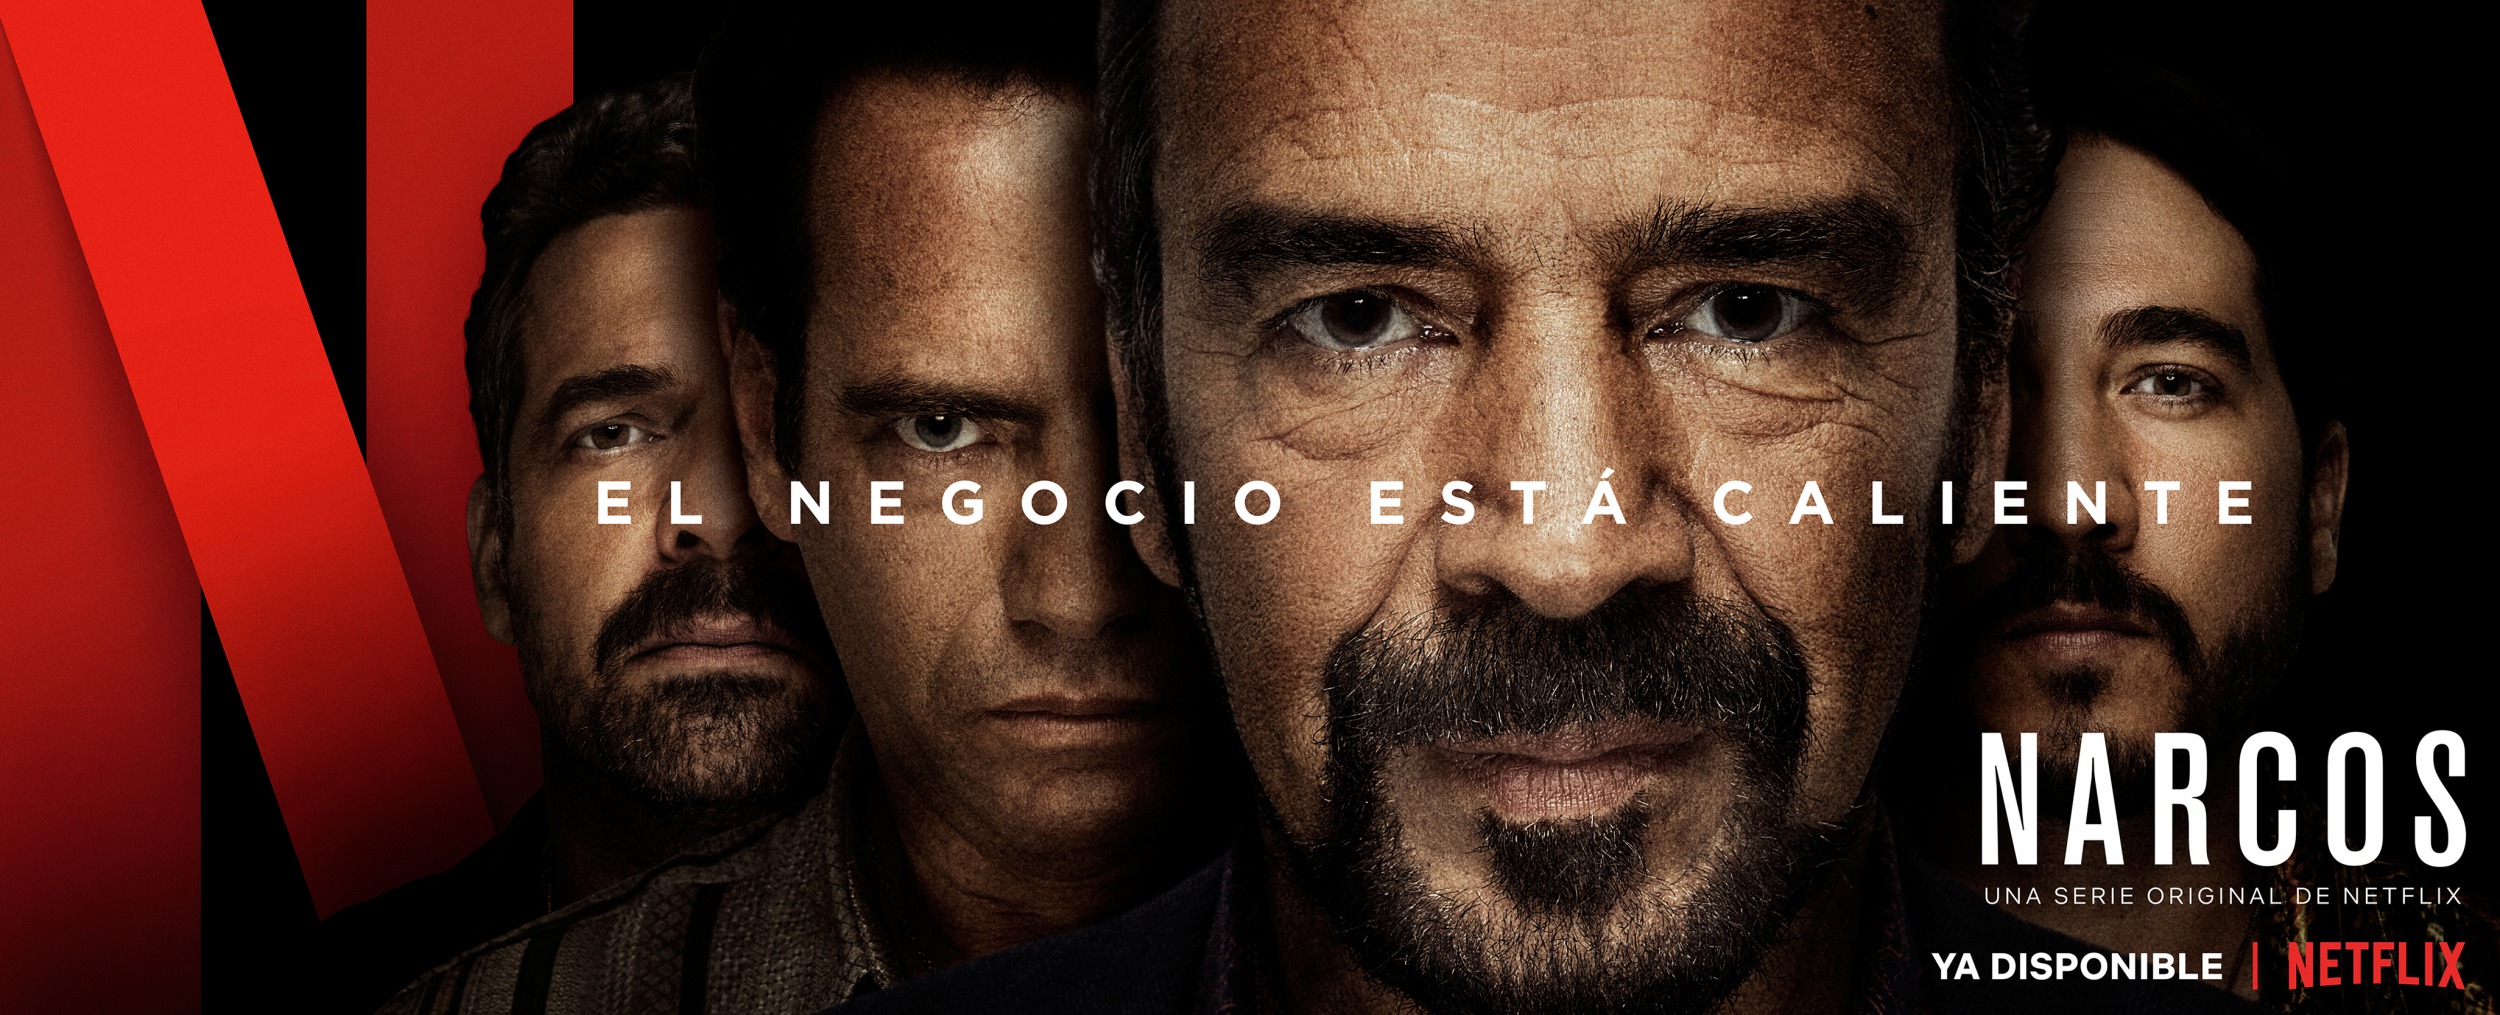 Mega Sized TV Poster Image for Narcos (#24 of 29)